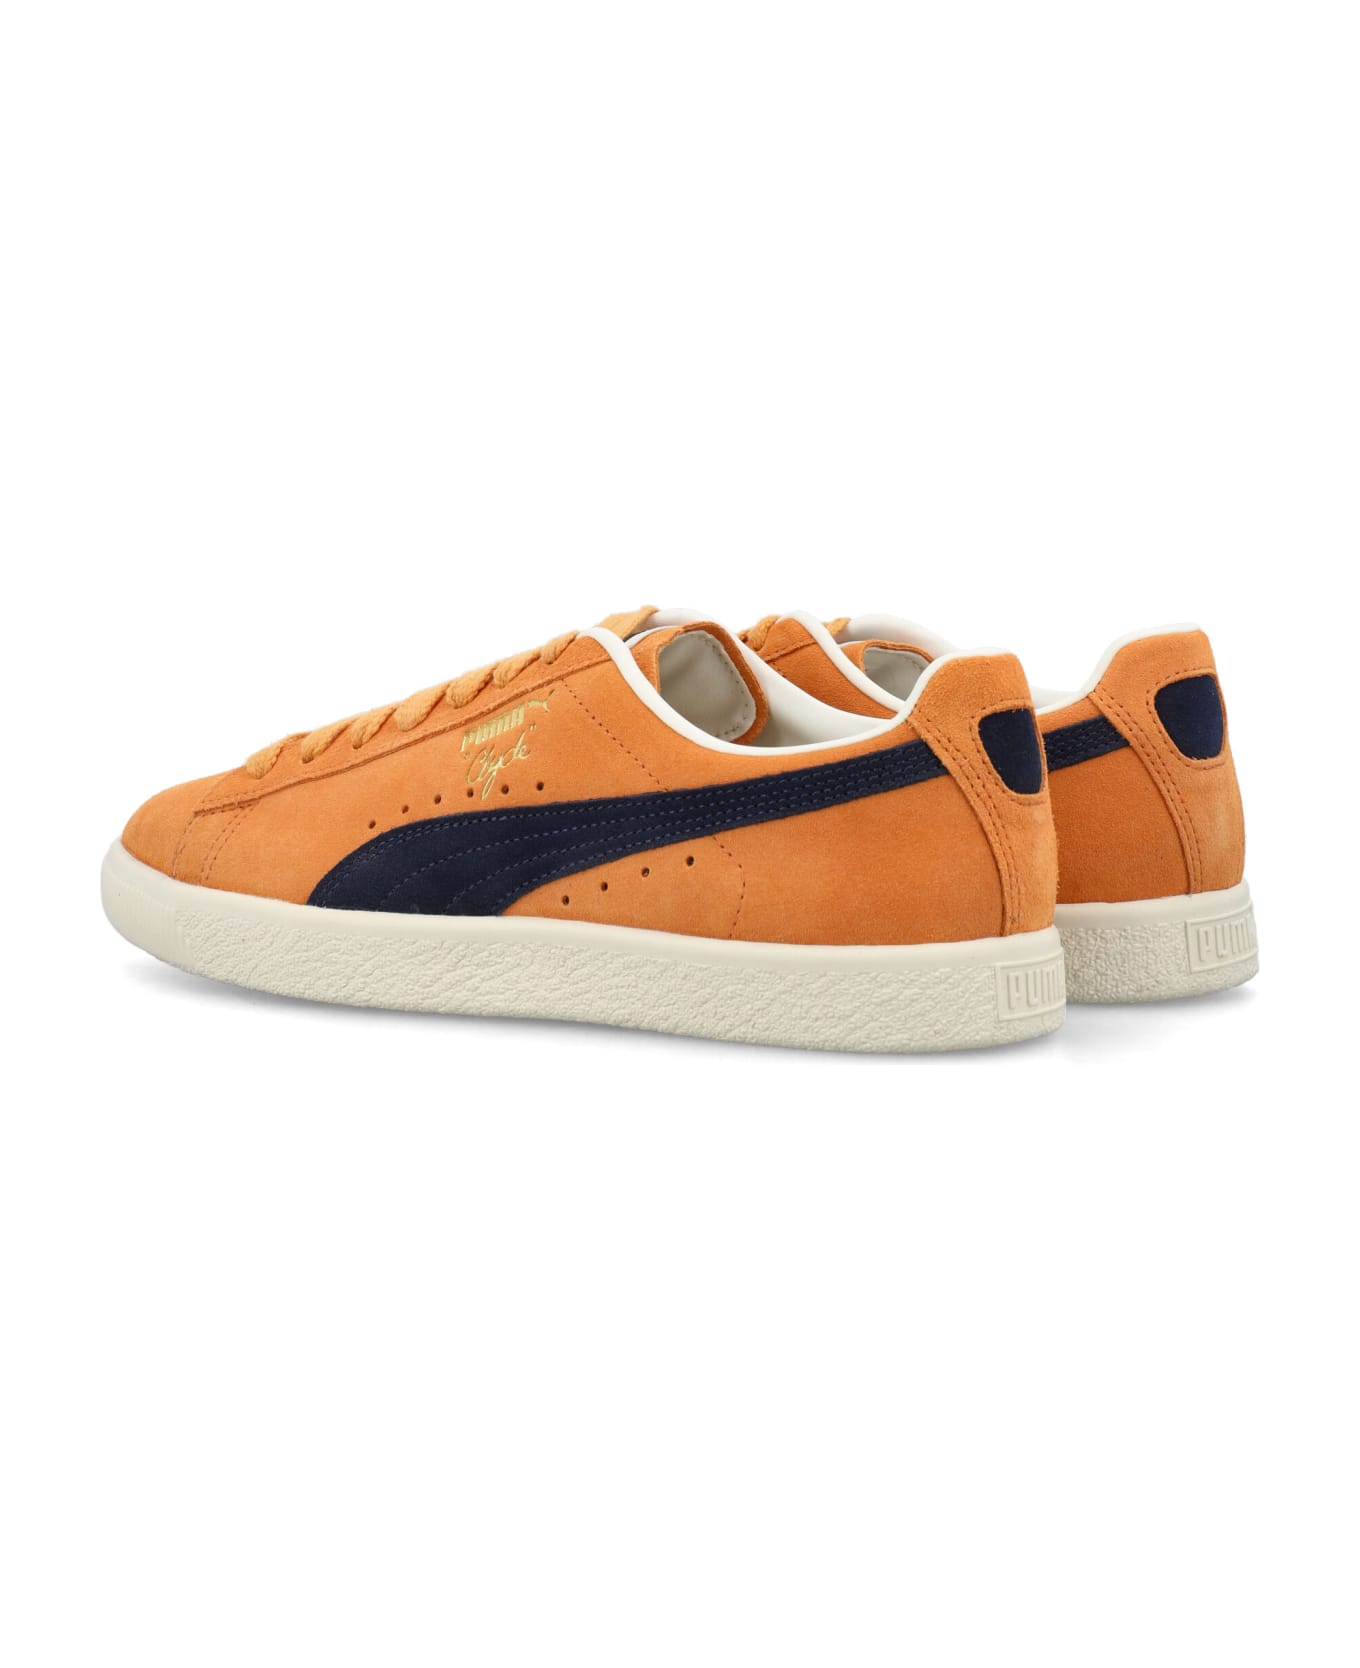 Puma Clyde Og Sneakers - CLEMENTINE NAVY スニーカー